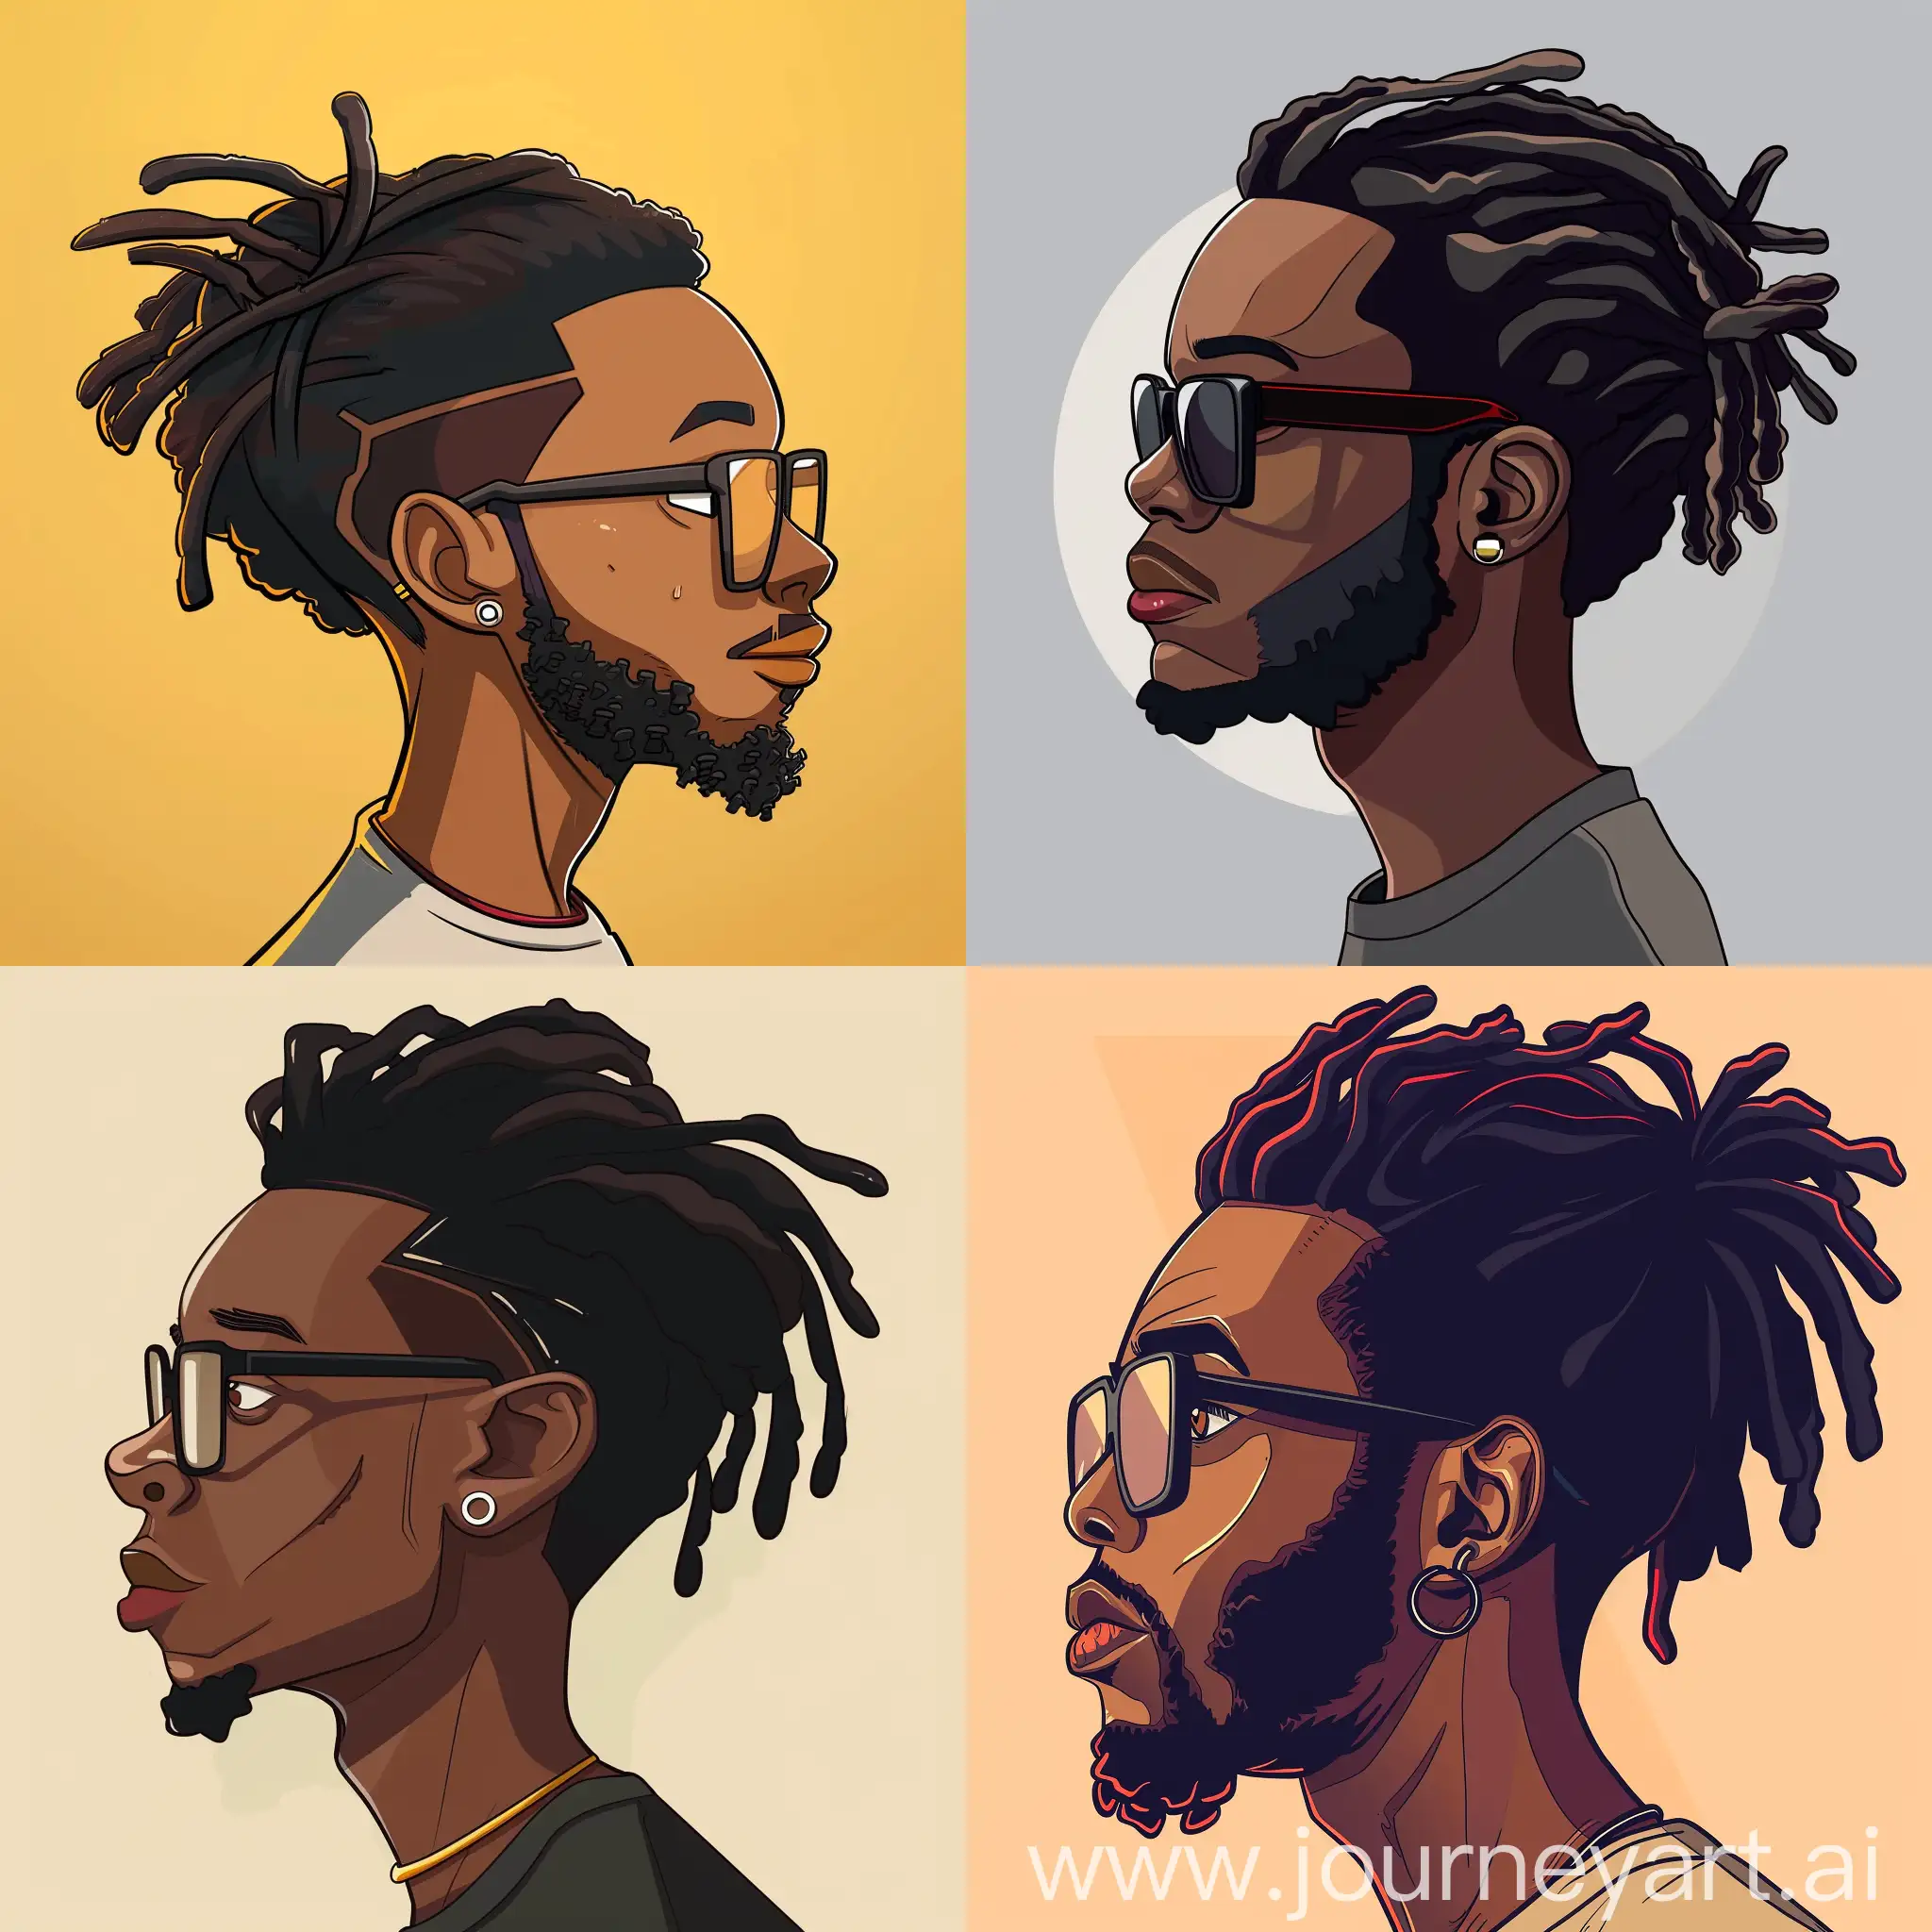 create me  a cartoon black guy with a small forehead and big jaw wearing big square glasses and has short dreadlocks (ear length) side view
